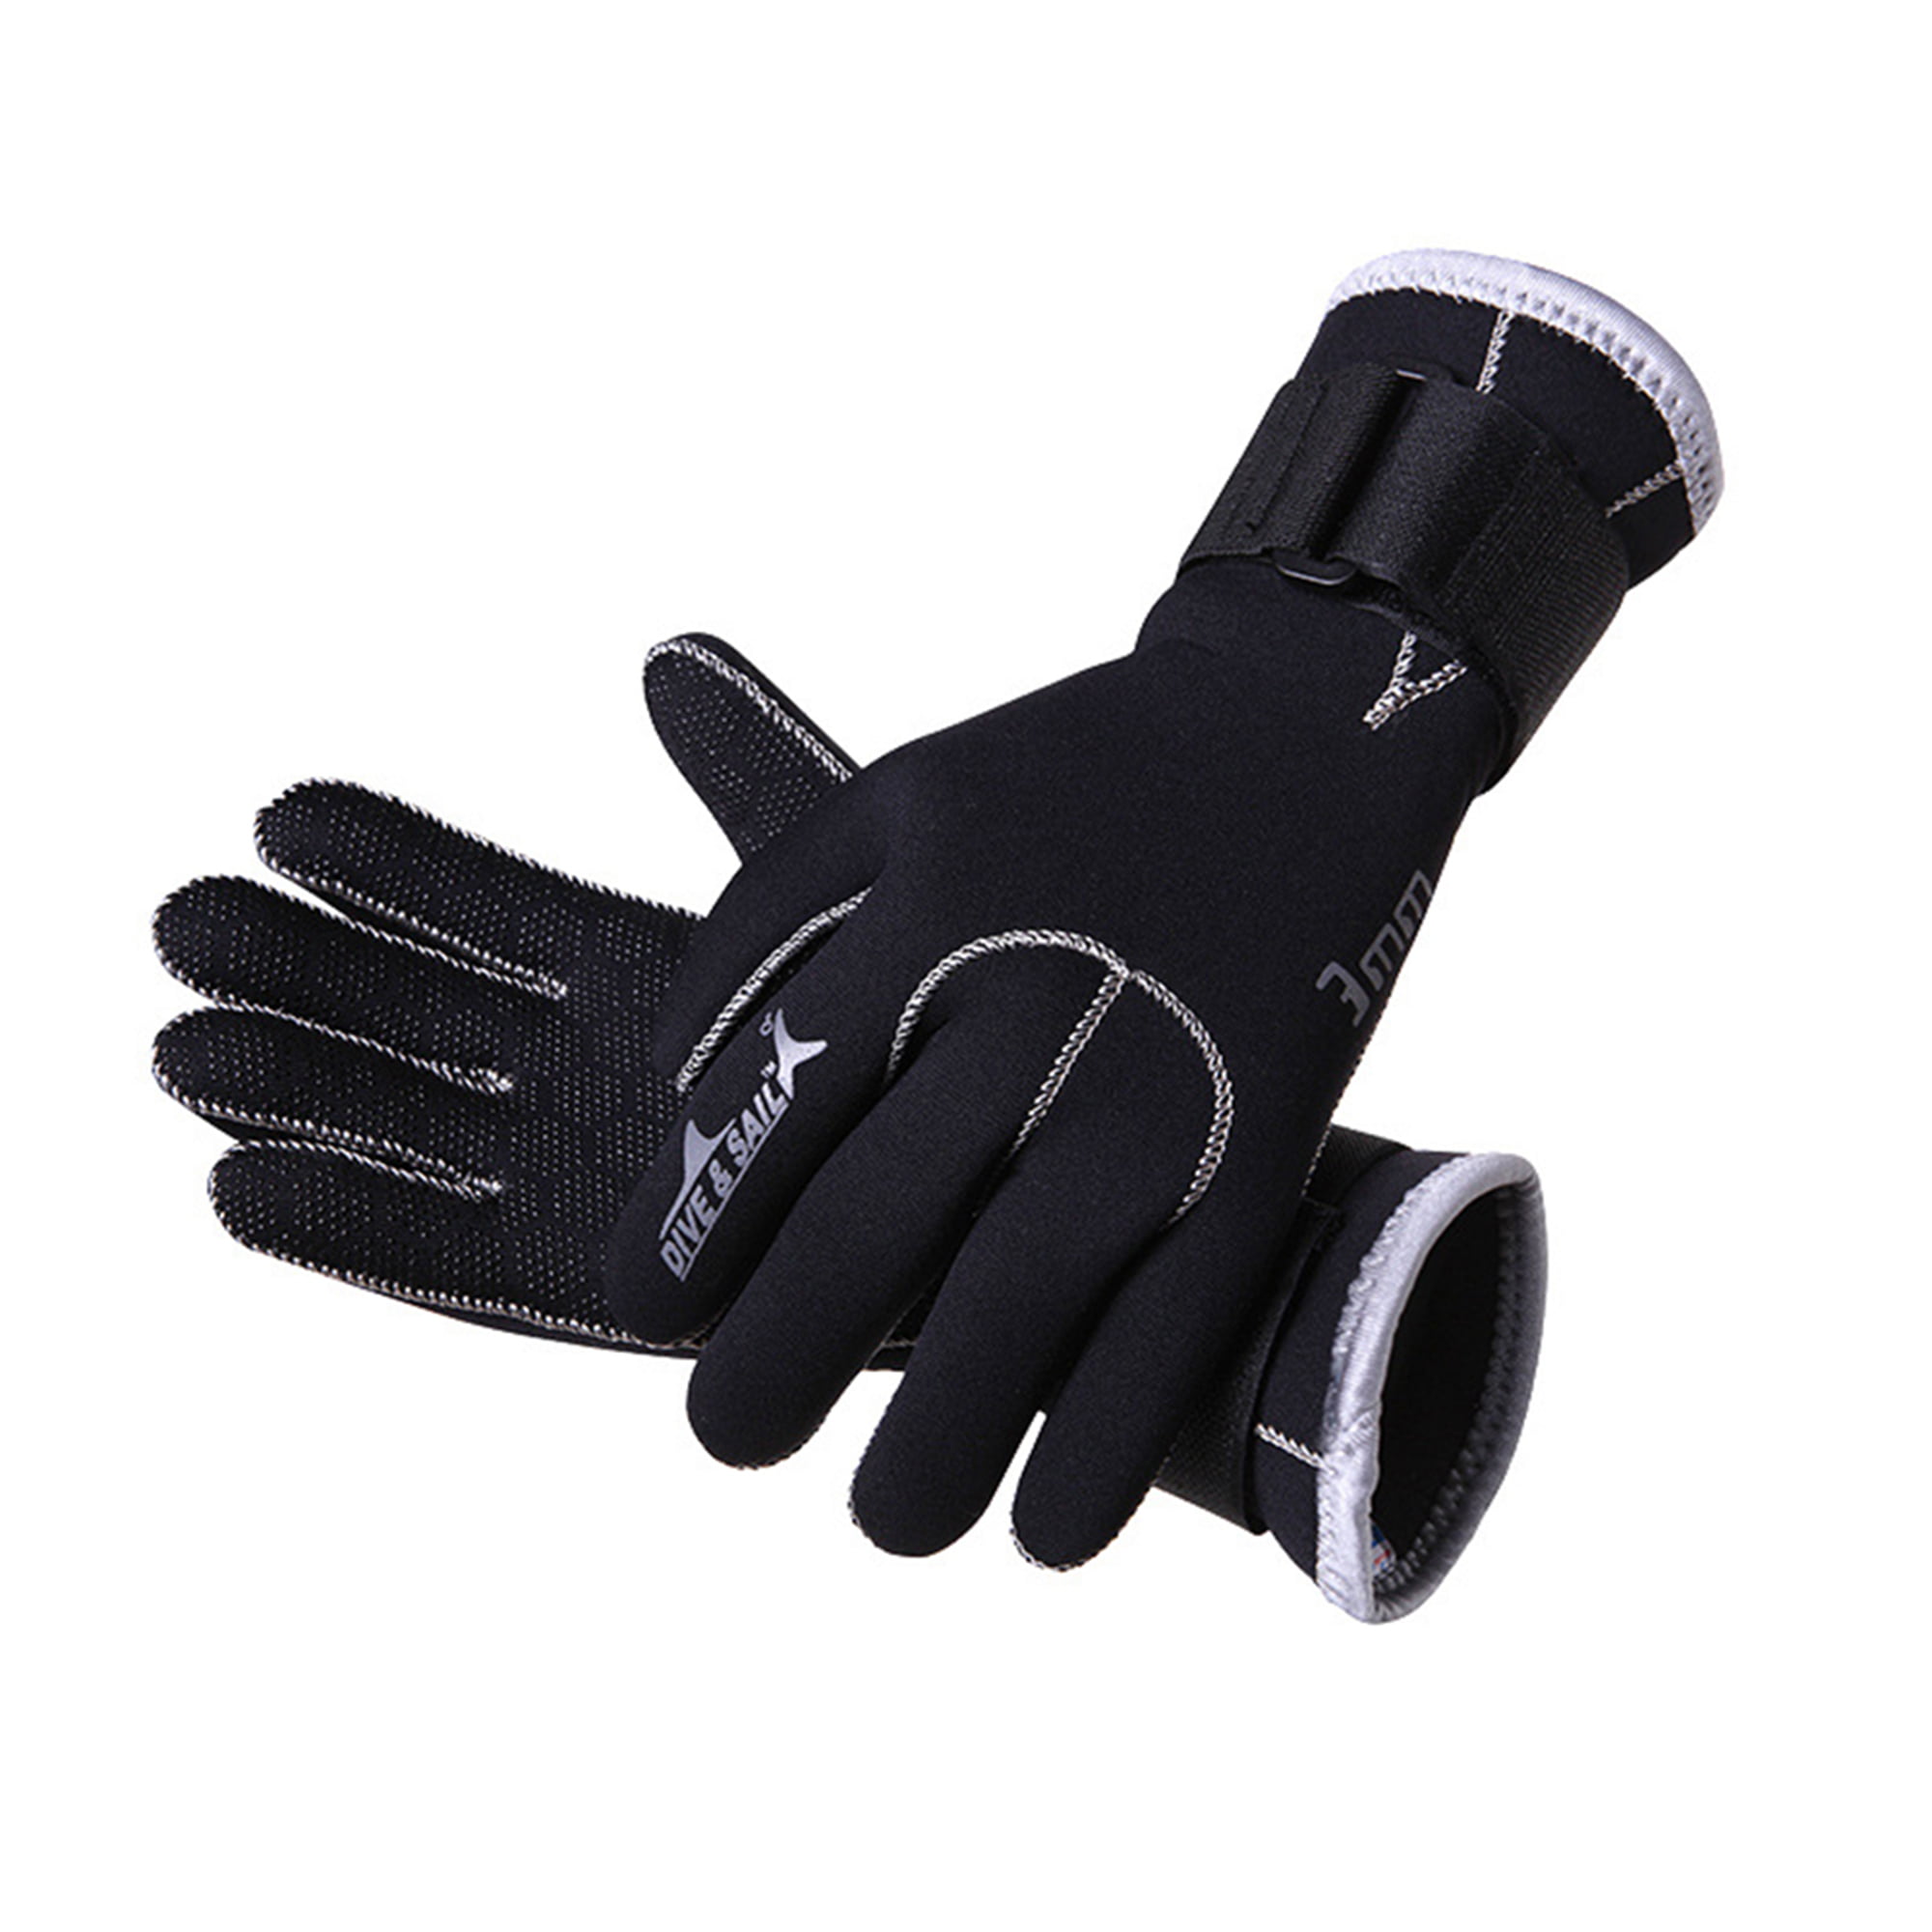 Details about   3mm Kids Children Neoprene Scuba Water Sports Swimming Diving Wetsuit Gloves